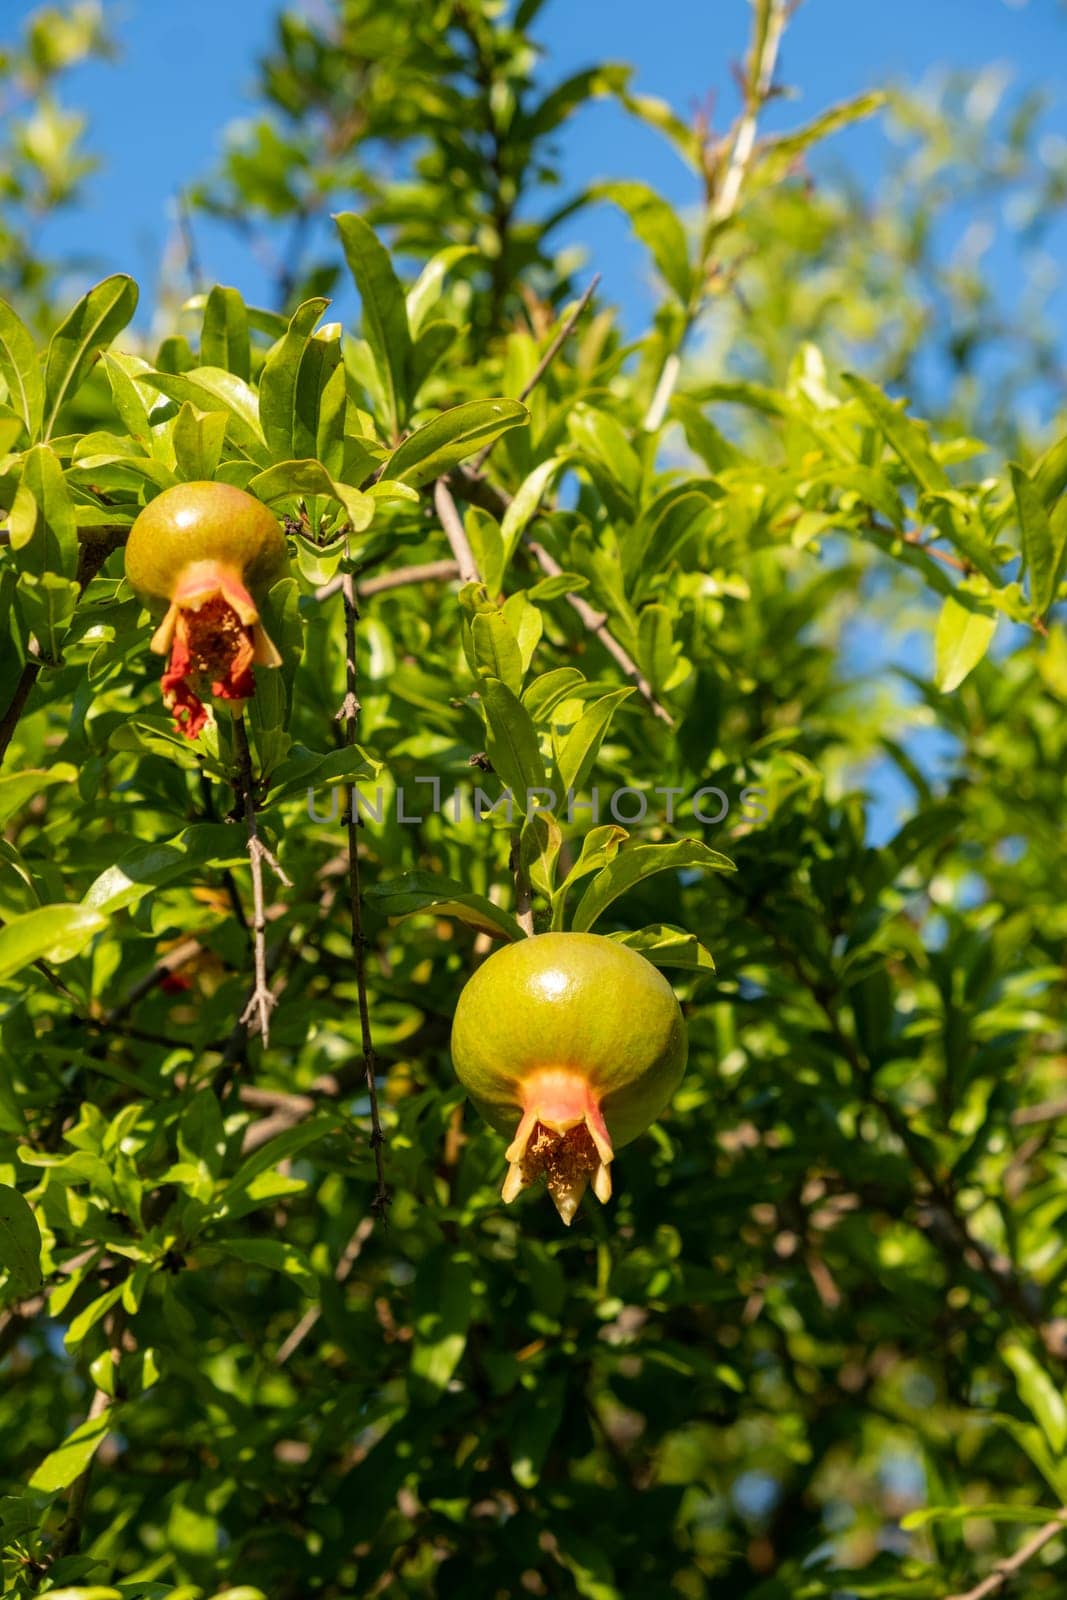 Pomegranate tree in a garden in Turkey. Small green pomegranate on a tree. Unripe pomegranate in the garden. Pomegranate on a branch with green leaves. Useful fruits. fruit harvest.orchard background